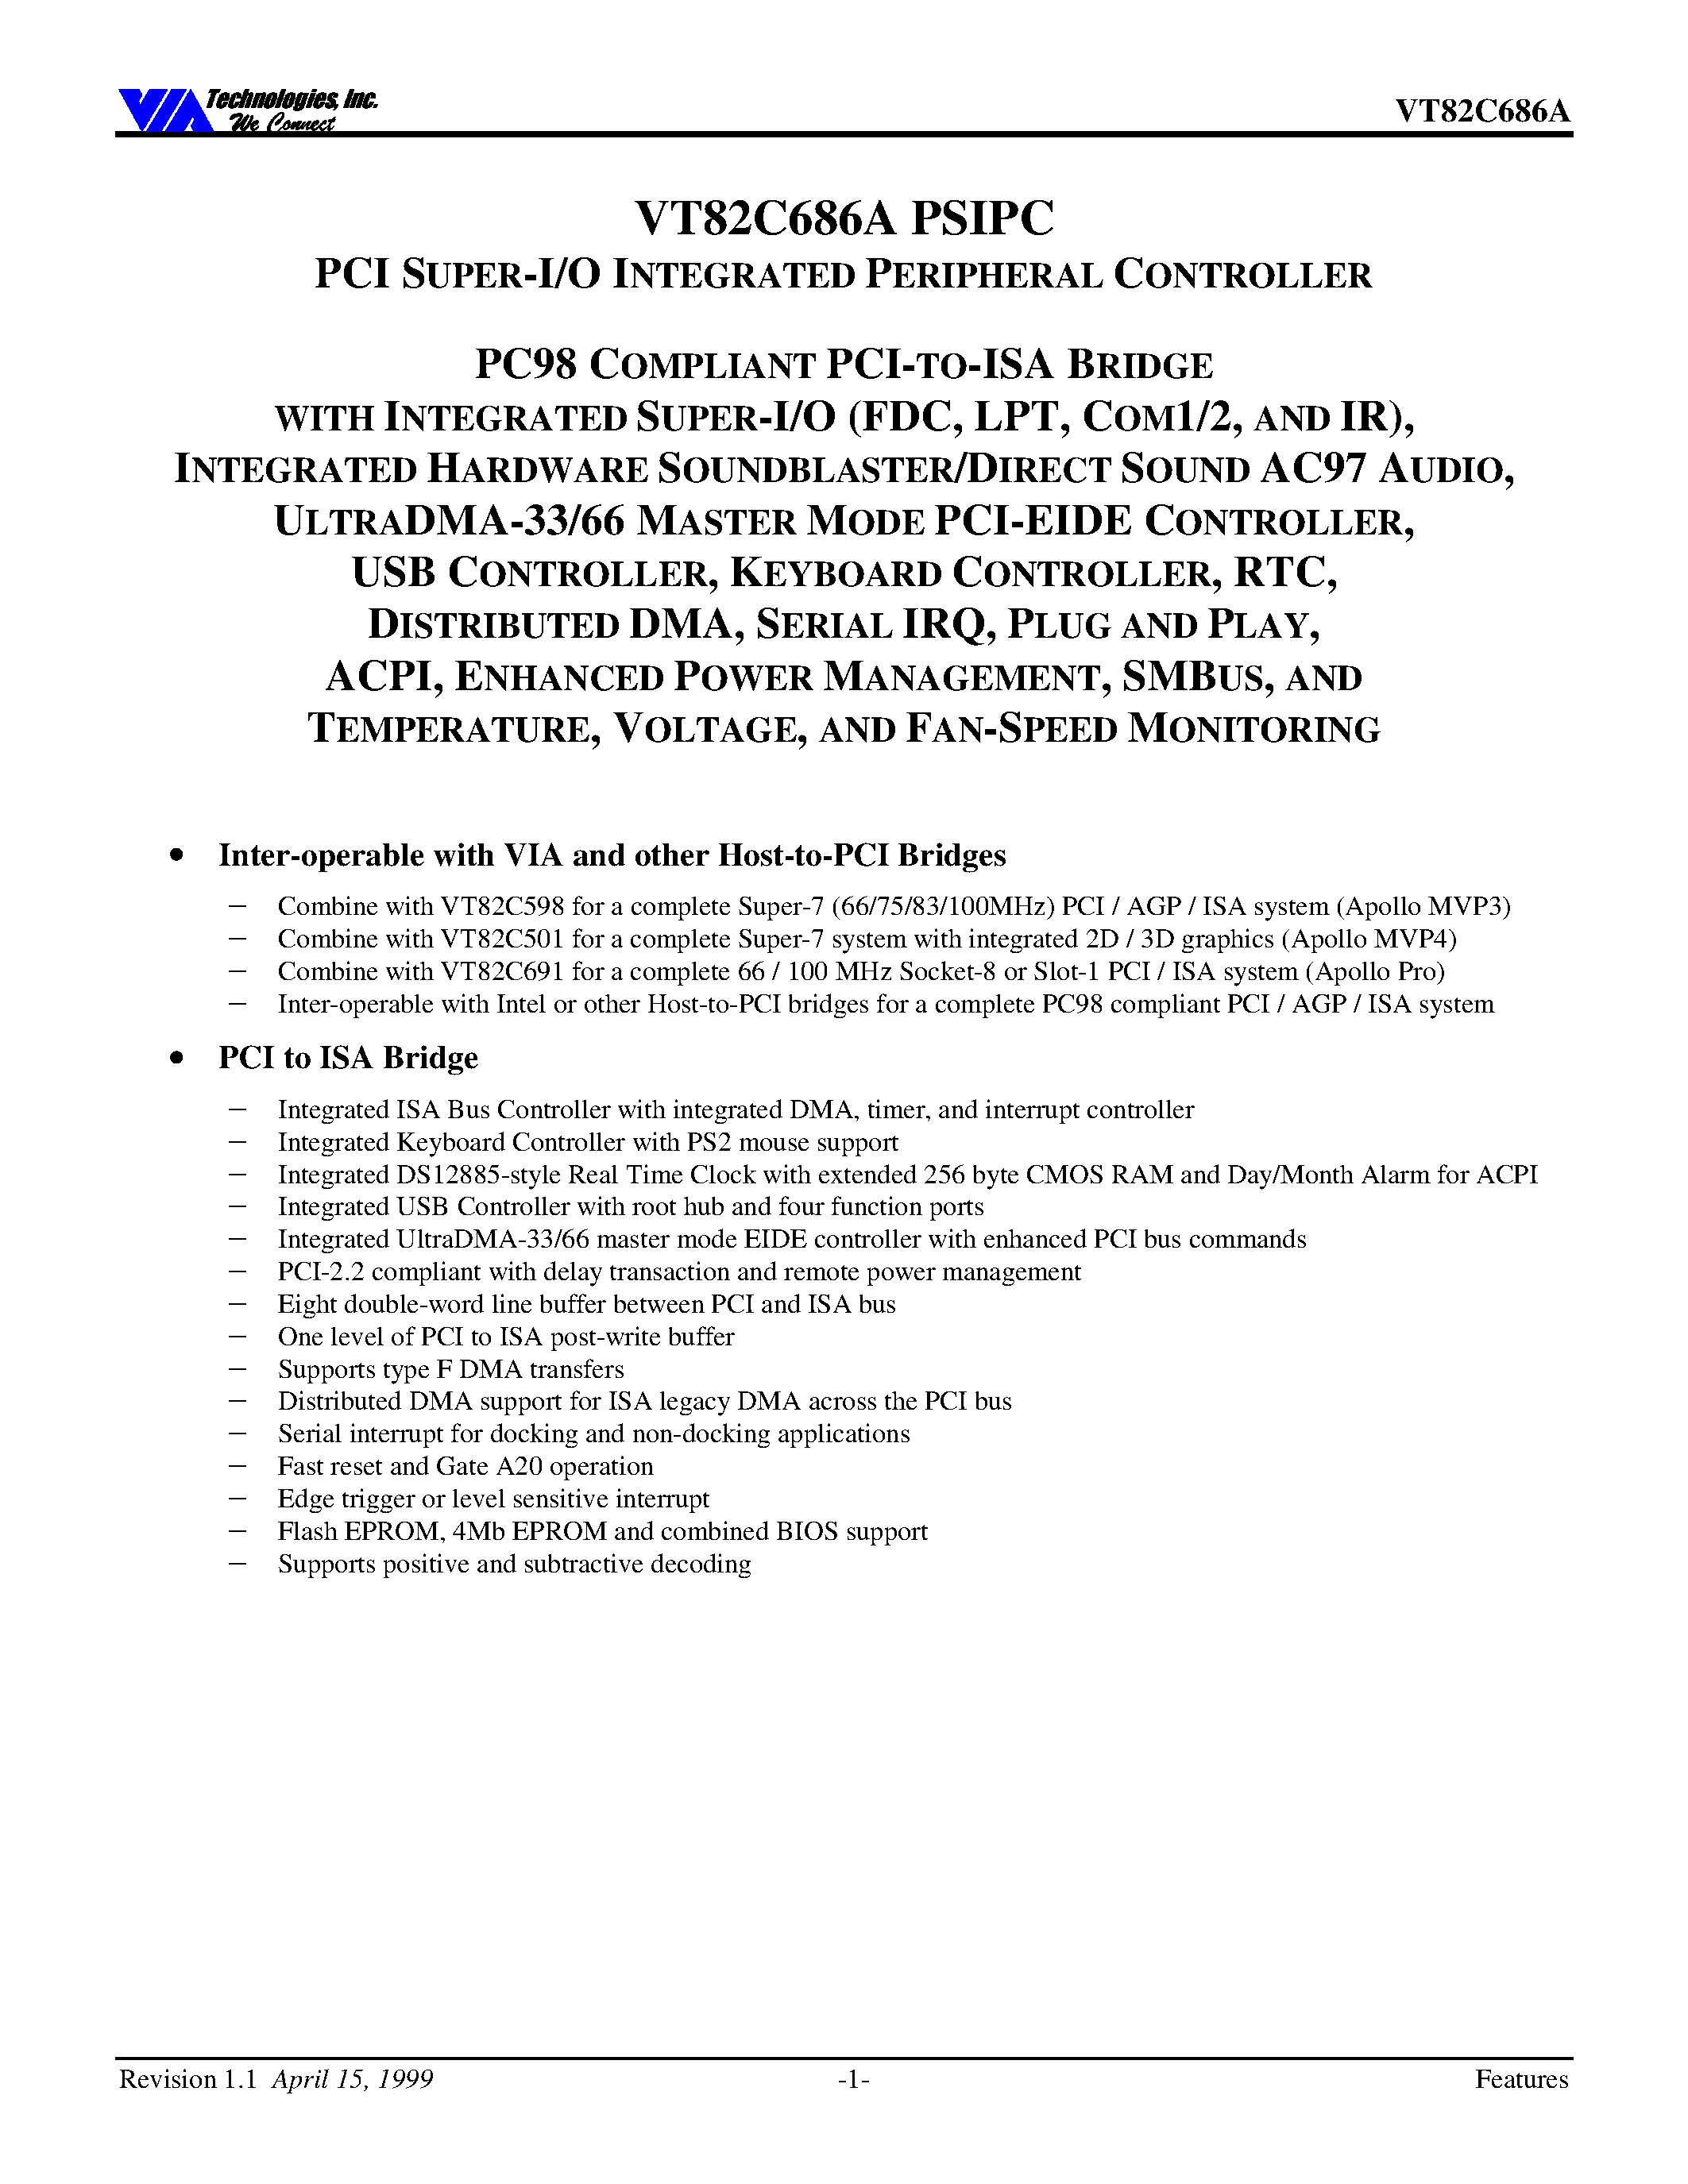 Datasheet VT82C686A - PCI SUPER-I/O INTEGRATED PERIPHERAL CONTROLLER page 1